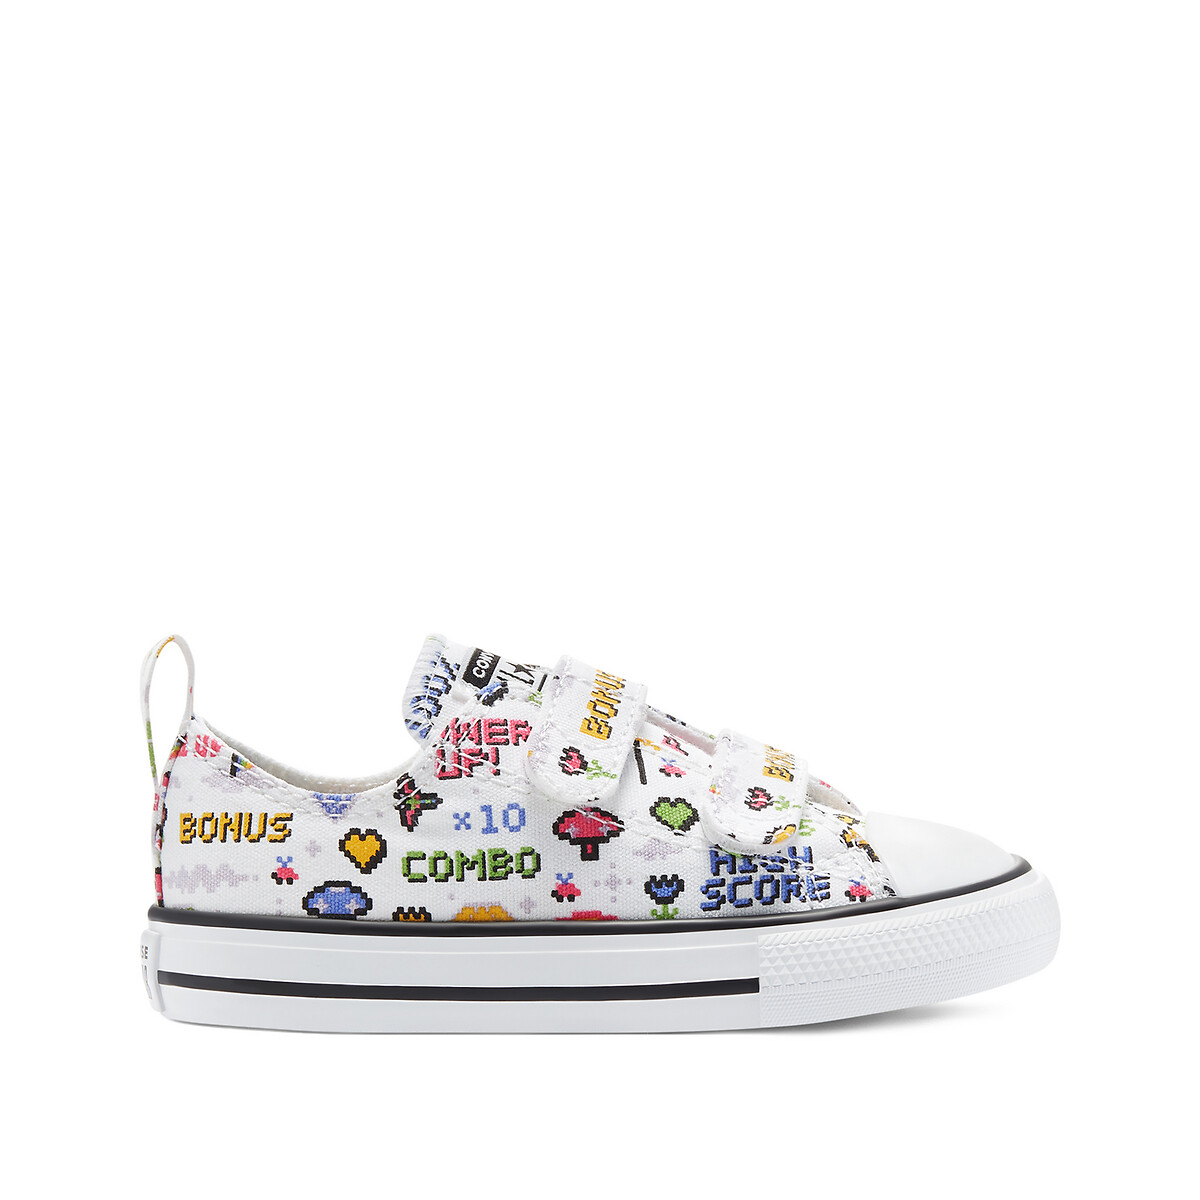 Chuck taylor all star 2v girls gamer trainers , multi-coloured ...